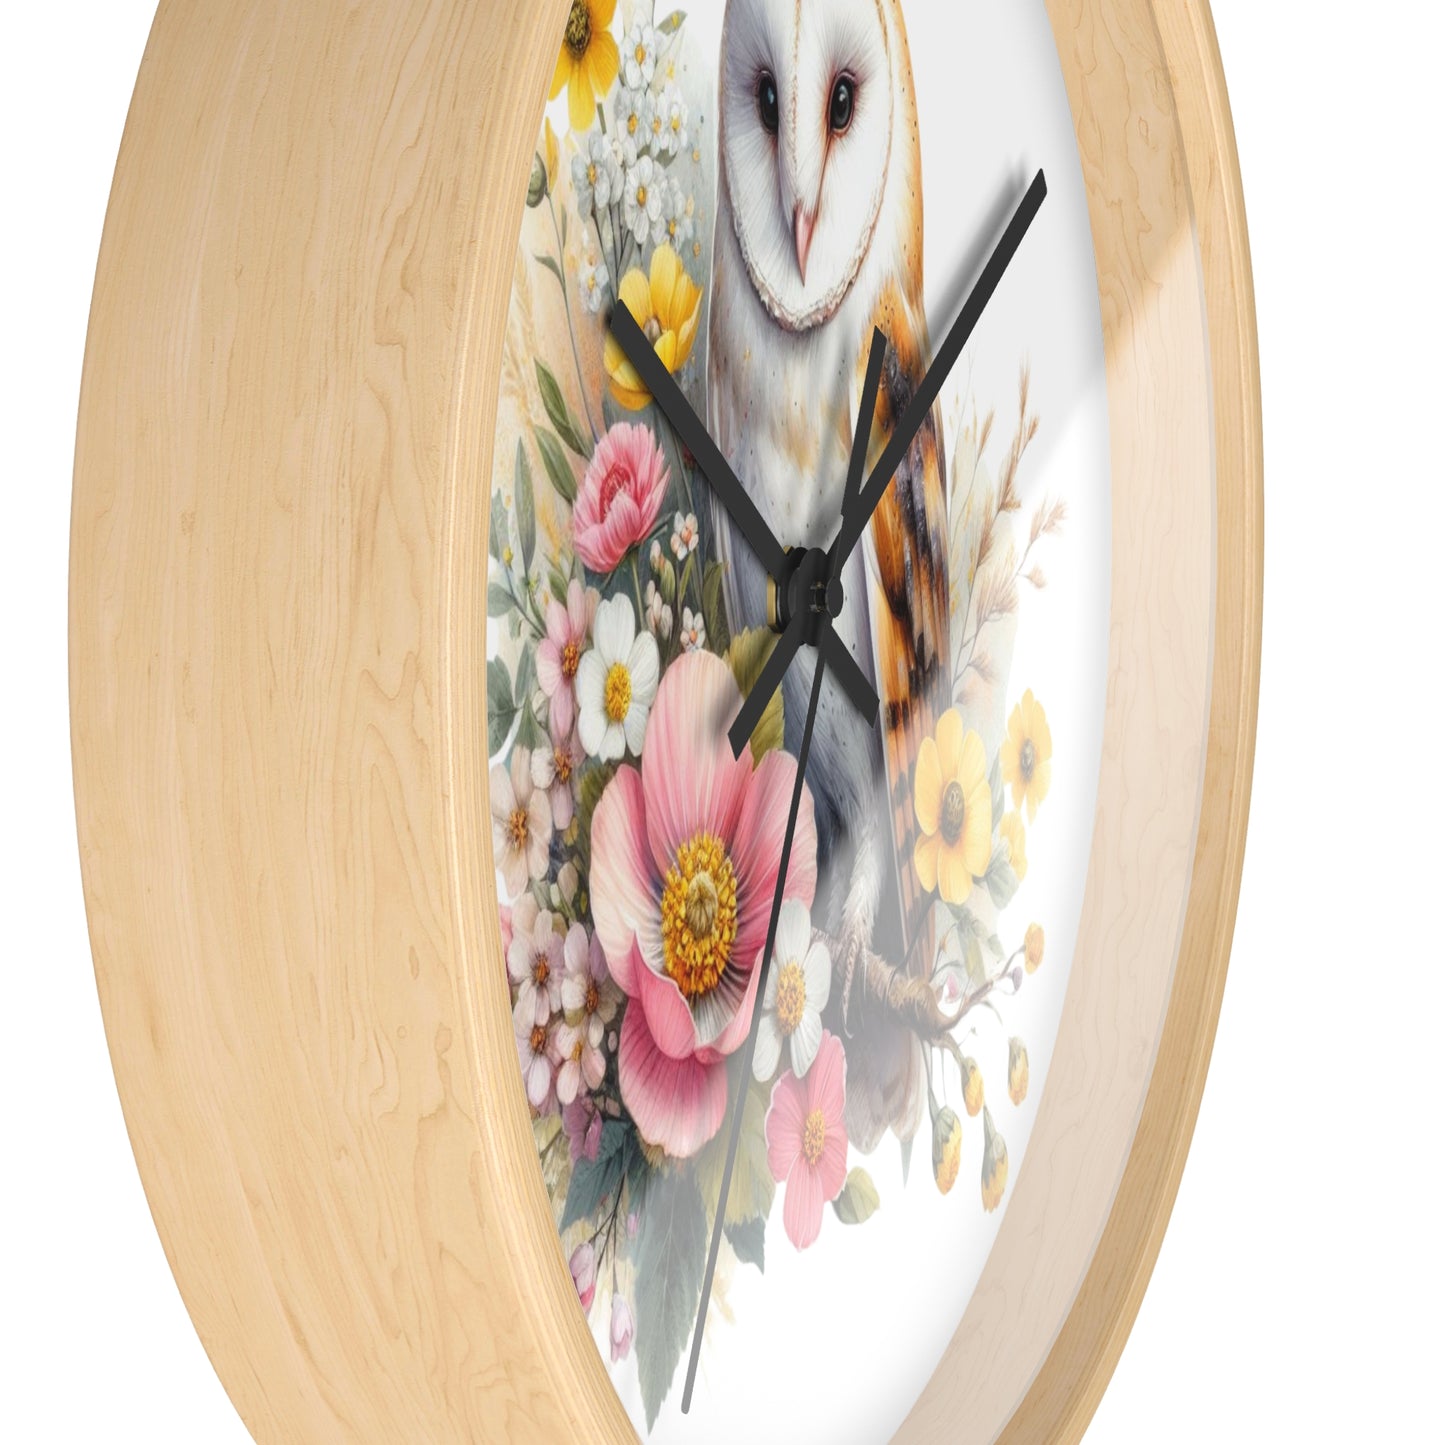 Barn Owl Wall Clock | Wall Art and Giftware by Hope Valley Home